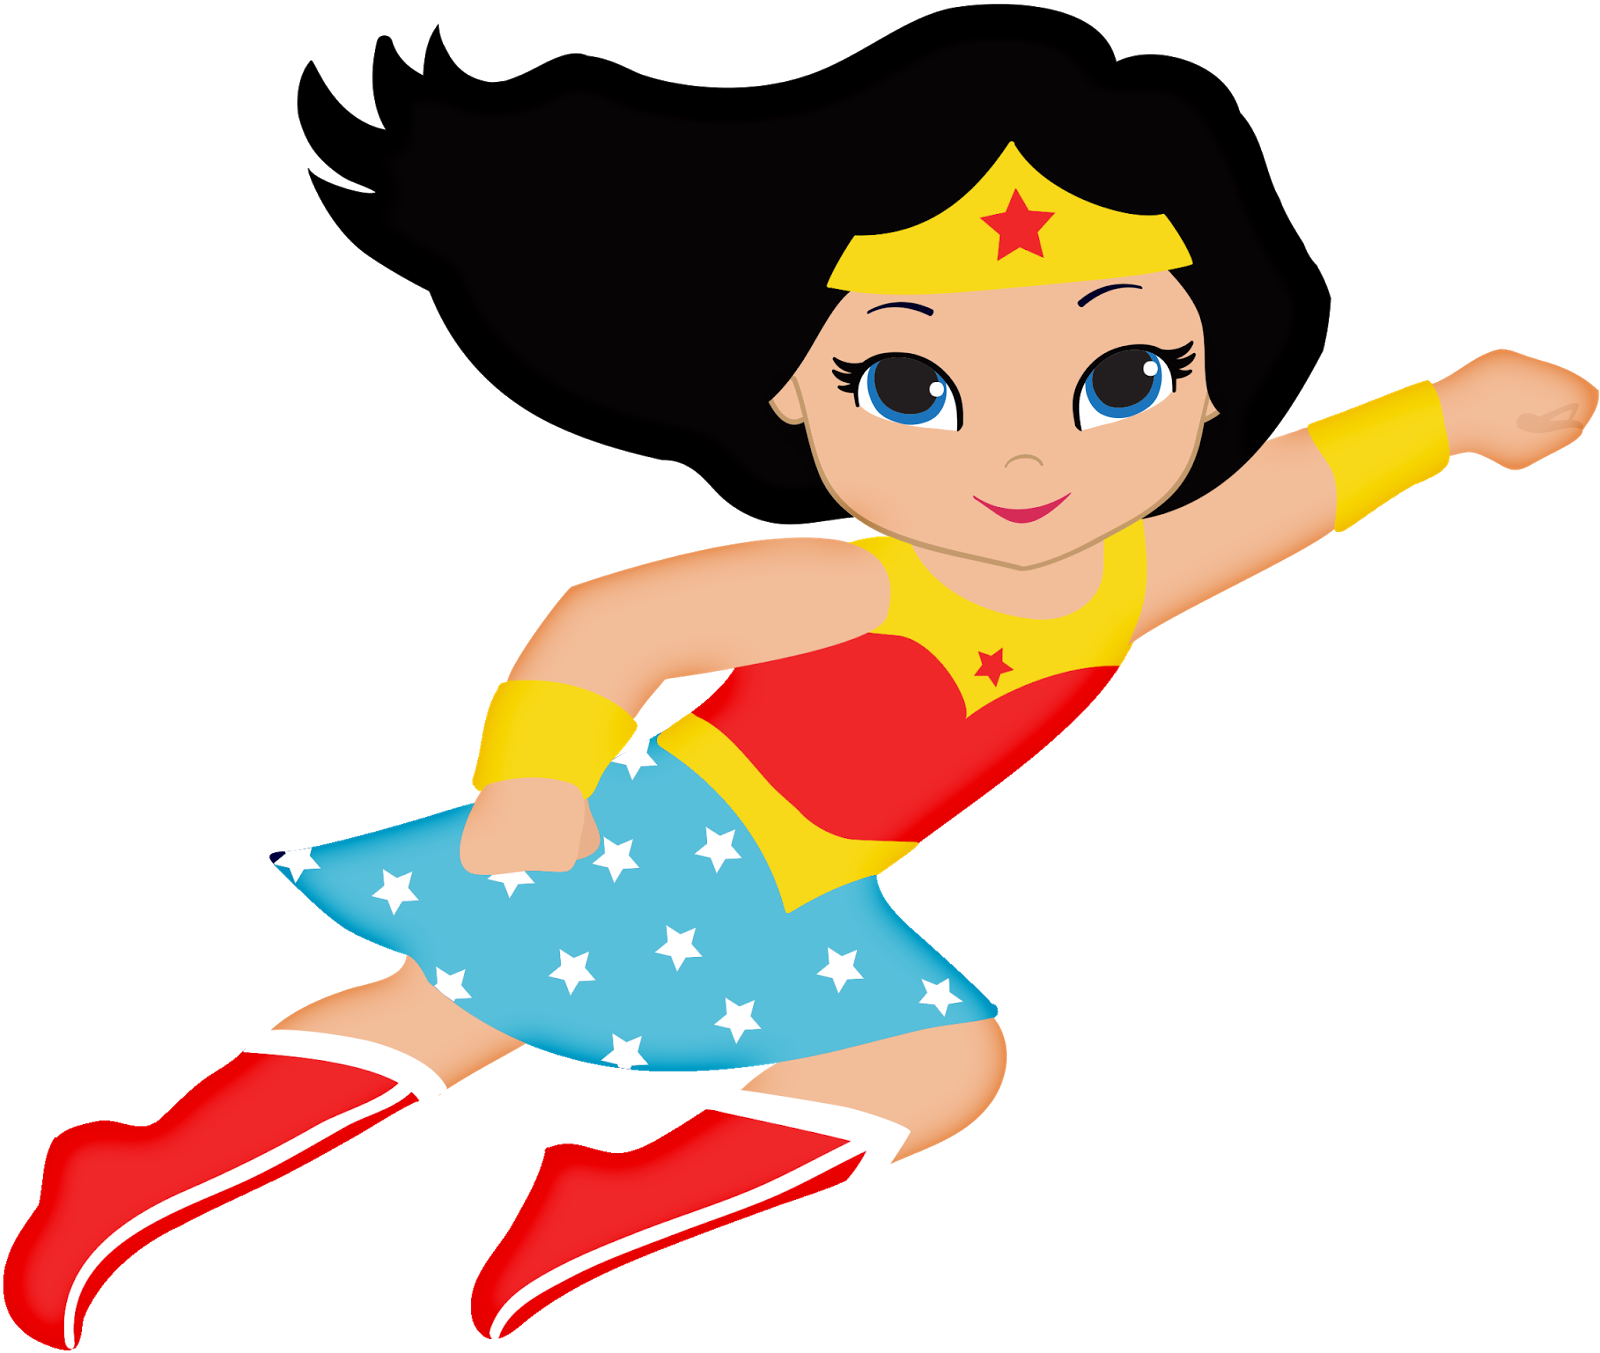 Mother clipart superhero. Wonder woman baby oh